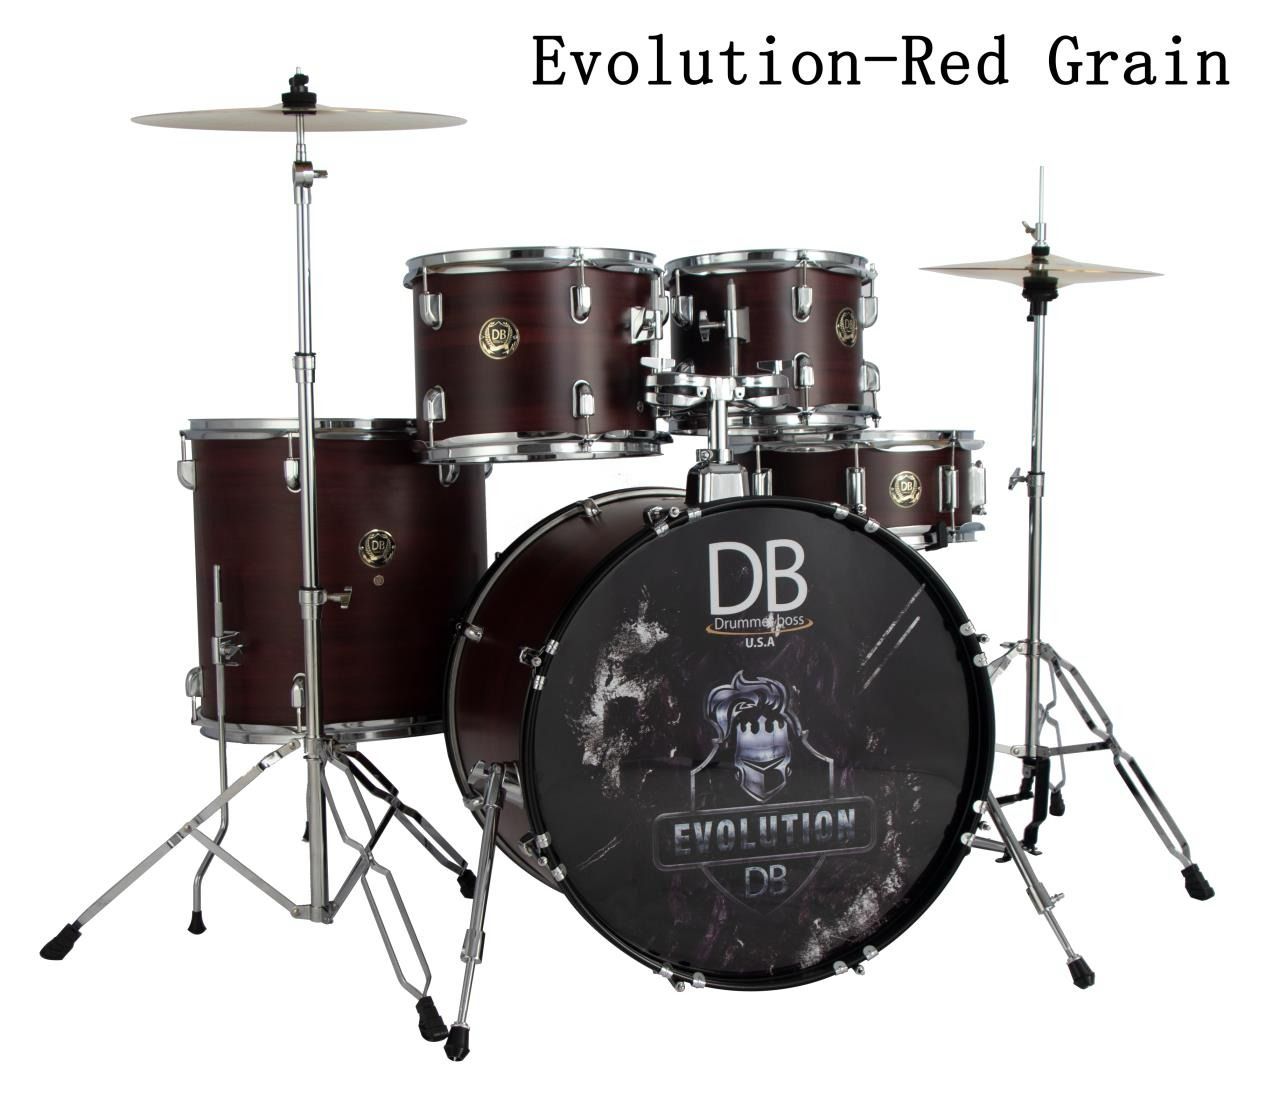 DB Drummer Boss Professional Drum Sets and Kits |Evolution-Red Grain